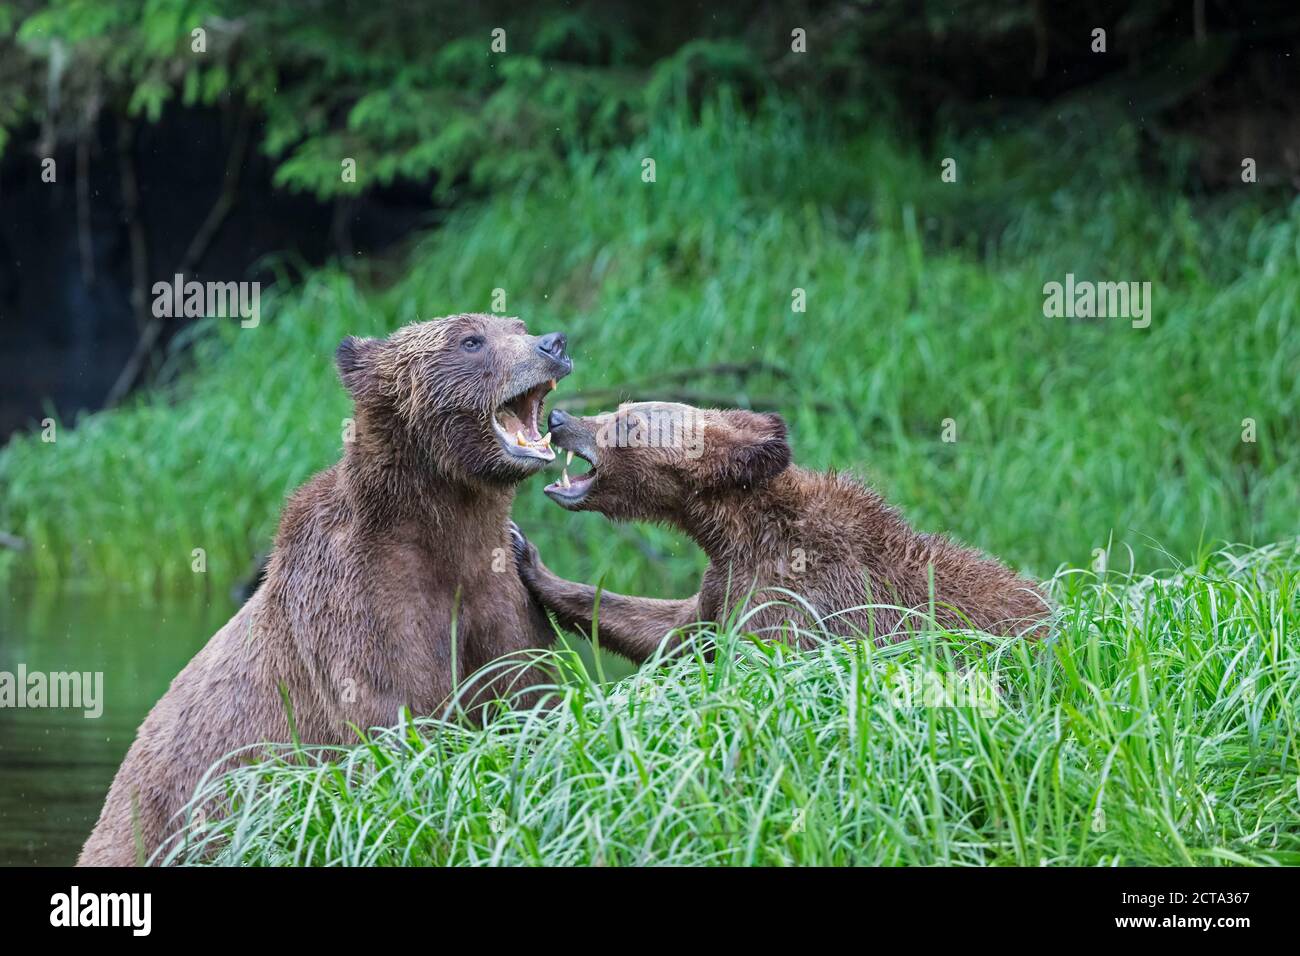 Canada, Khutzeymateen Grizzly Bear Sanctuary, Playing grizzly bears Stock Photo